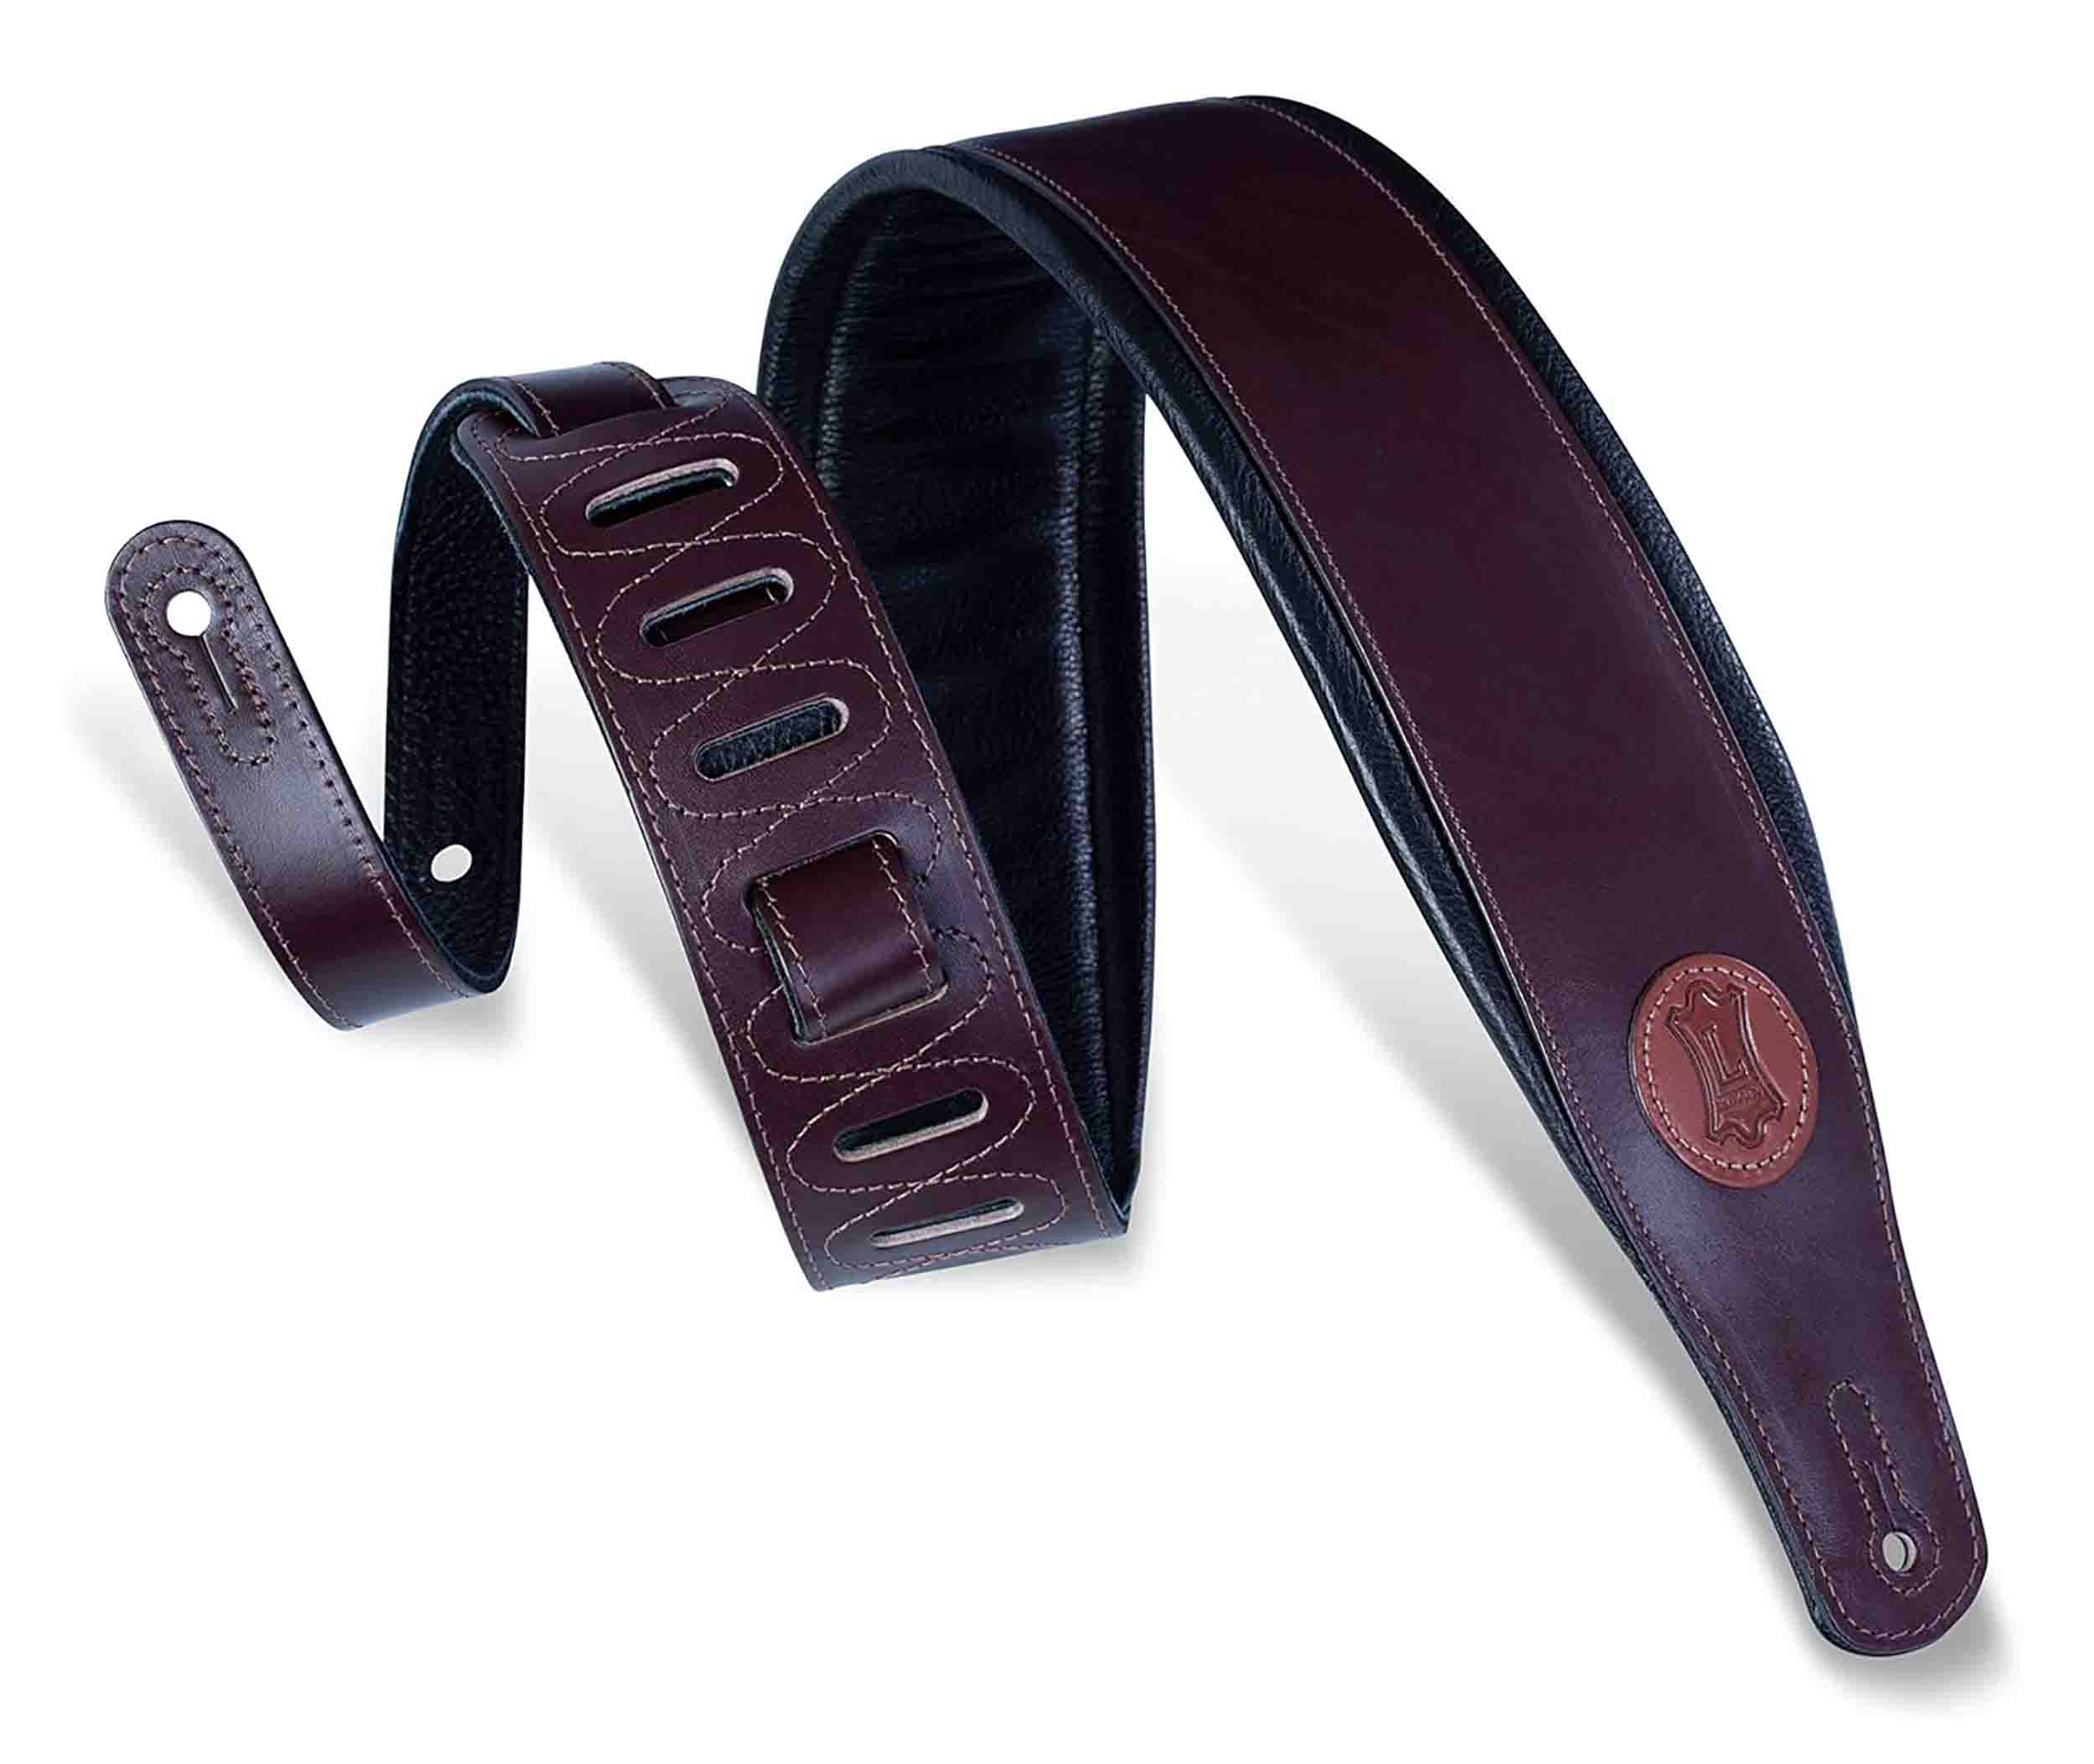 Levy’s Suede Leather Guitar Strap